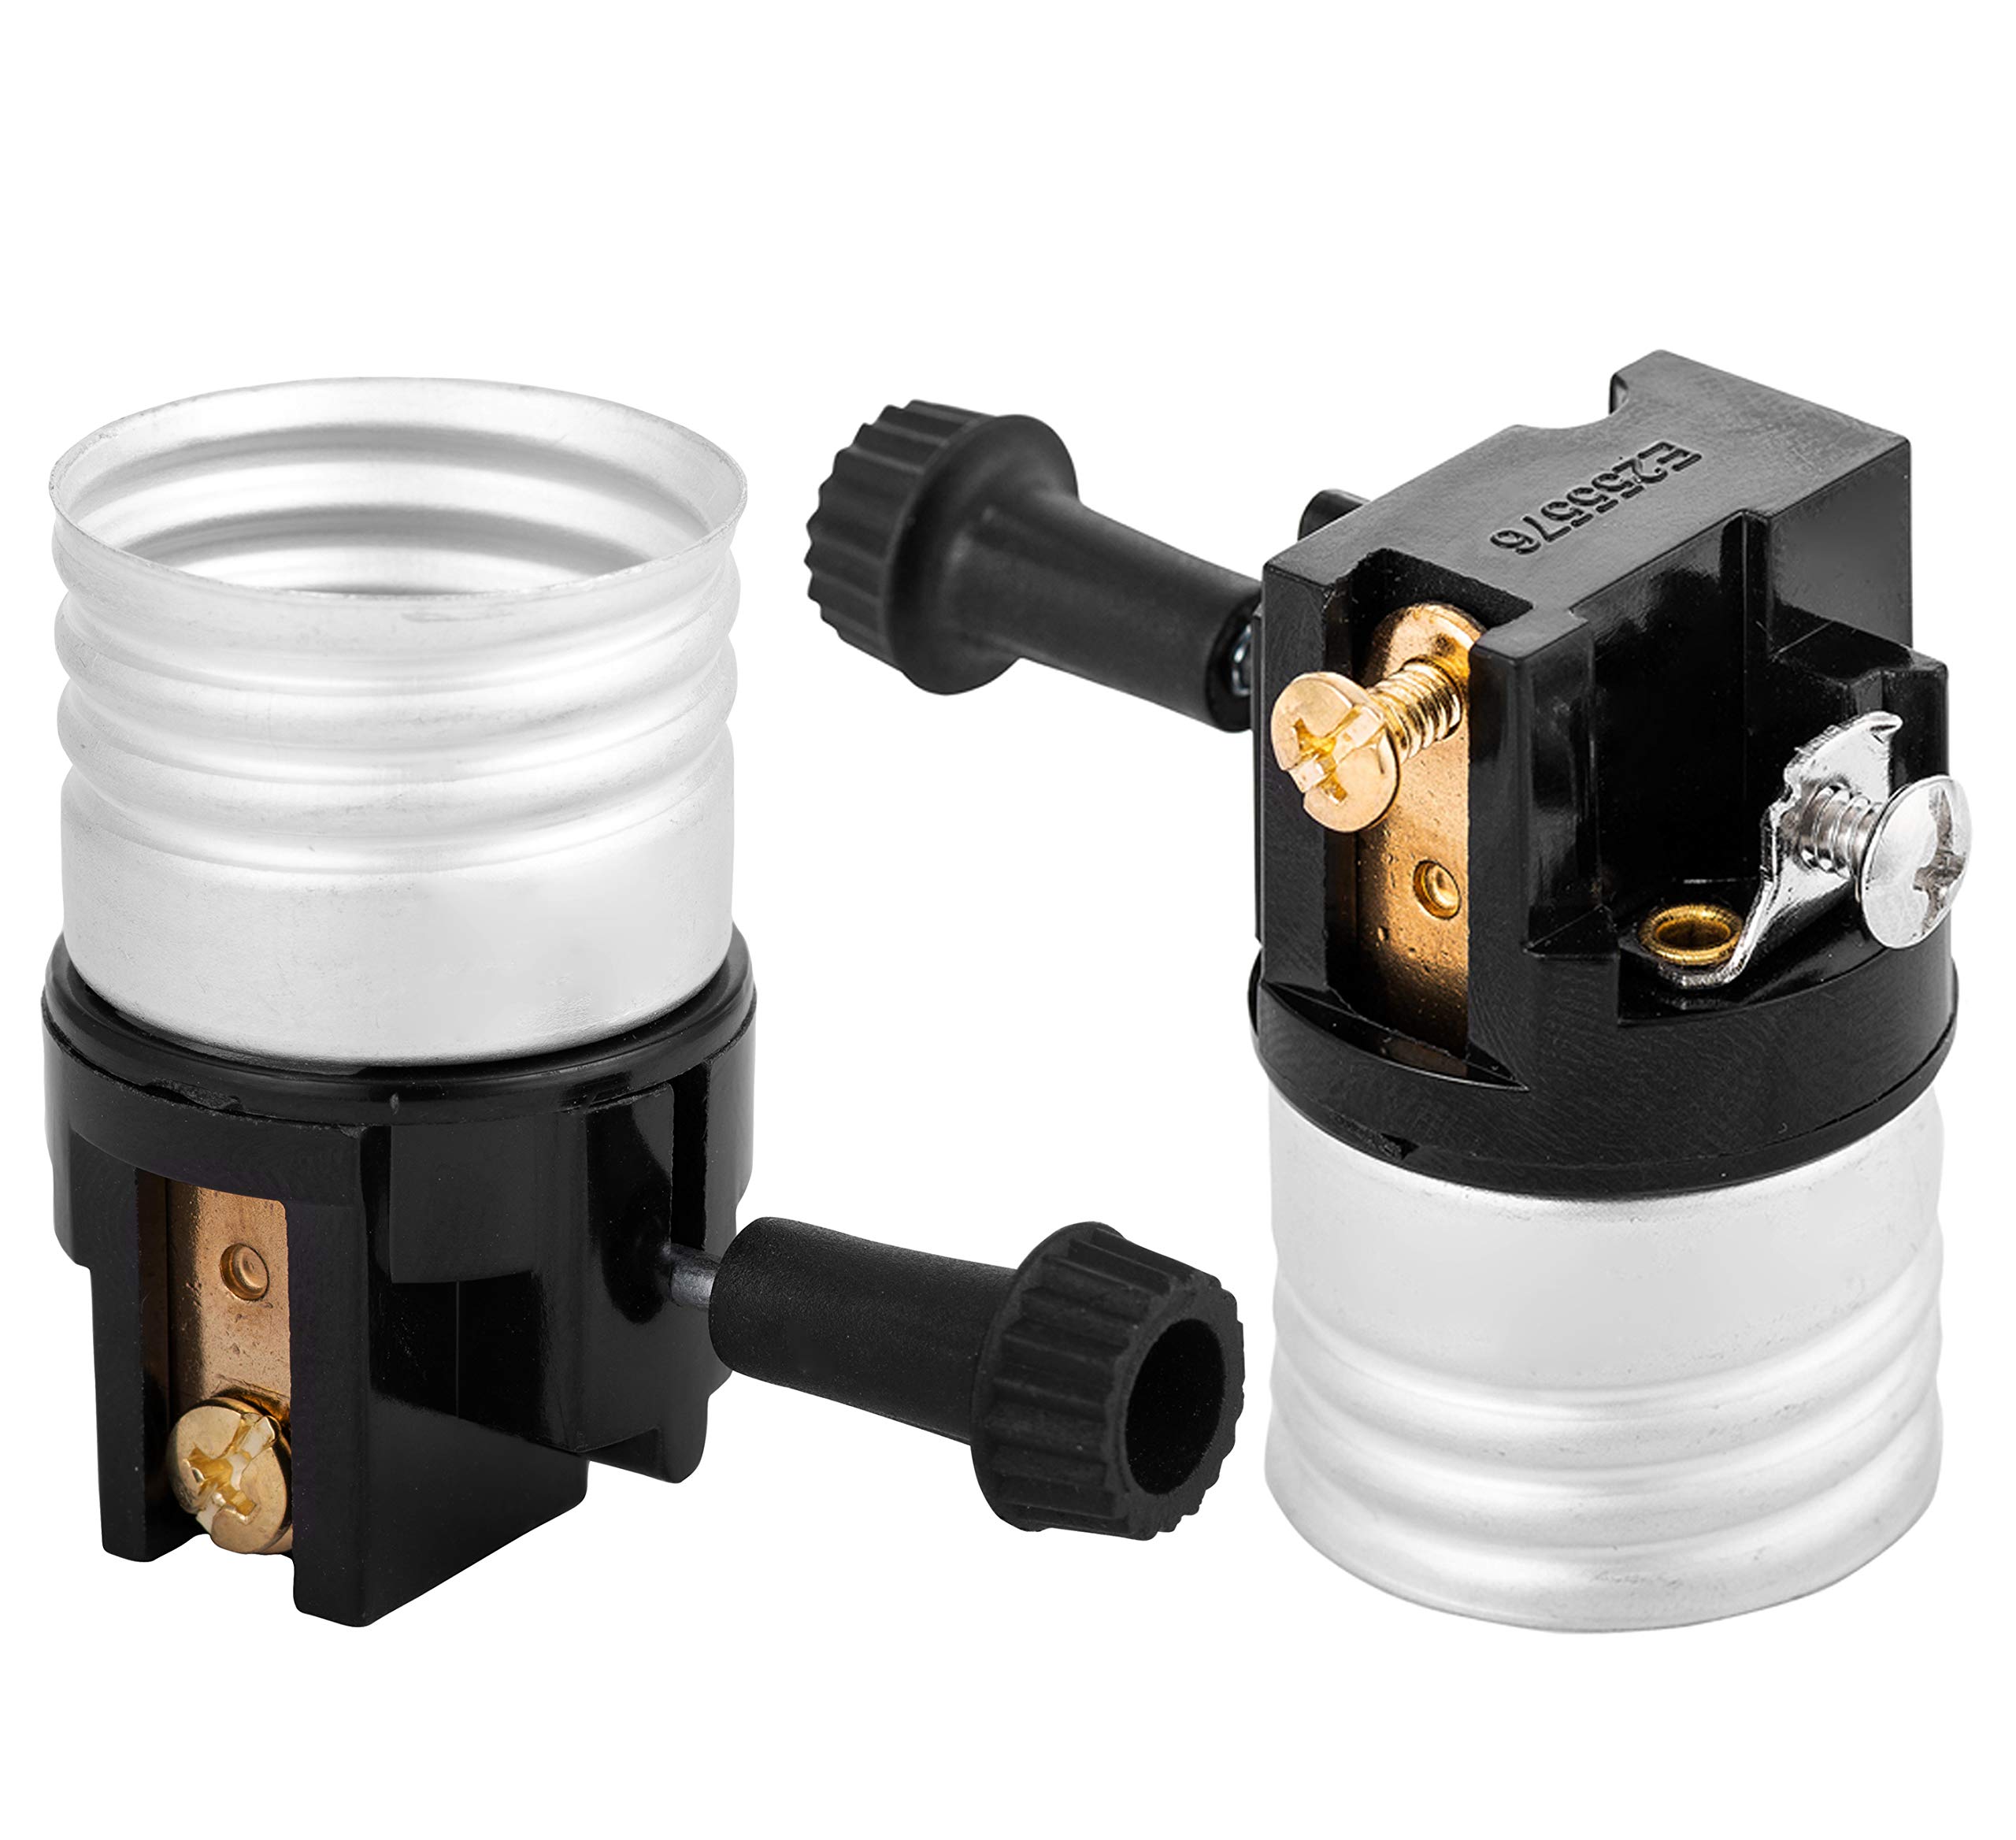 13 Amazing 3 Way Light Socket Replacement for 2023